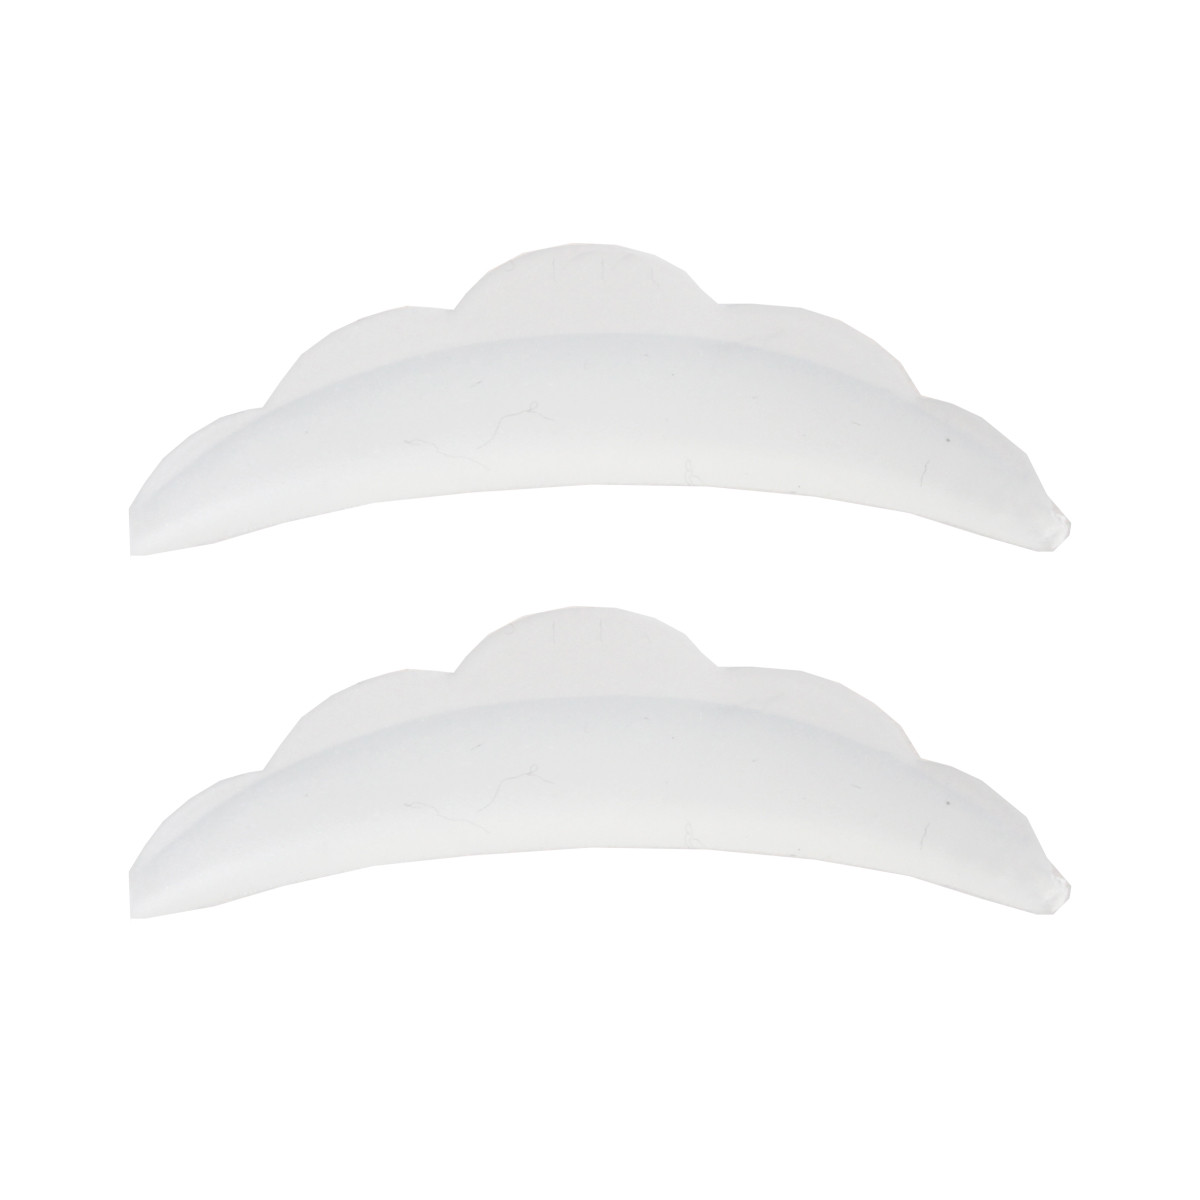 JM/BO.lash - Cloudy Silicone Pads taille M